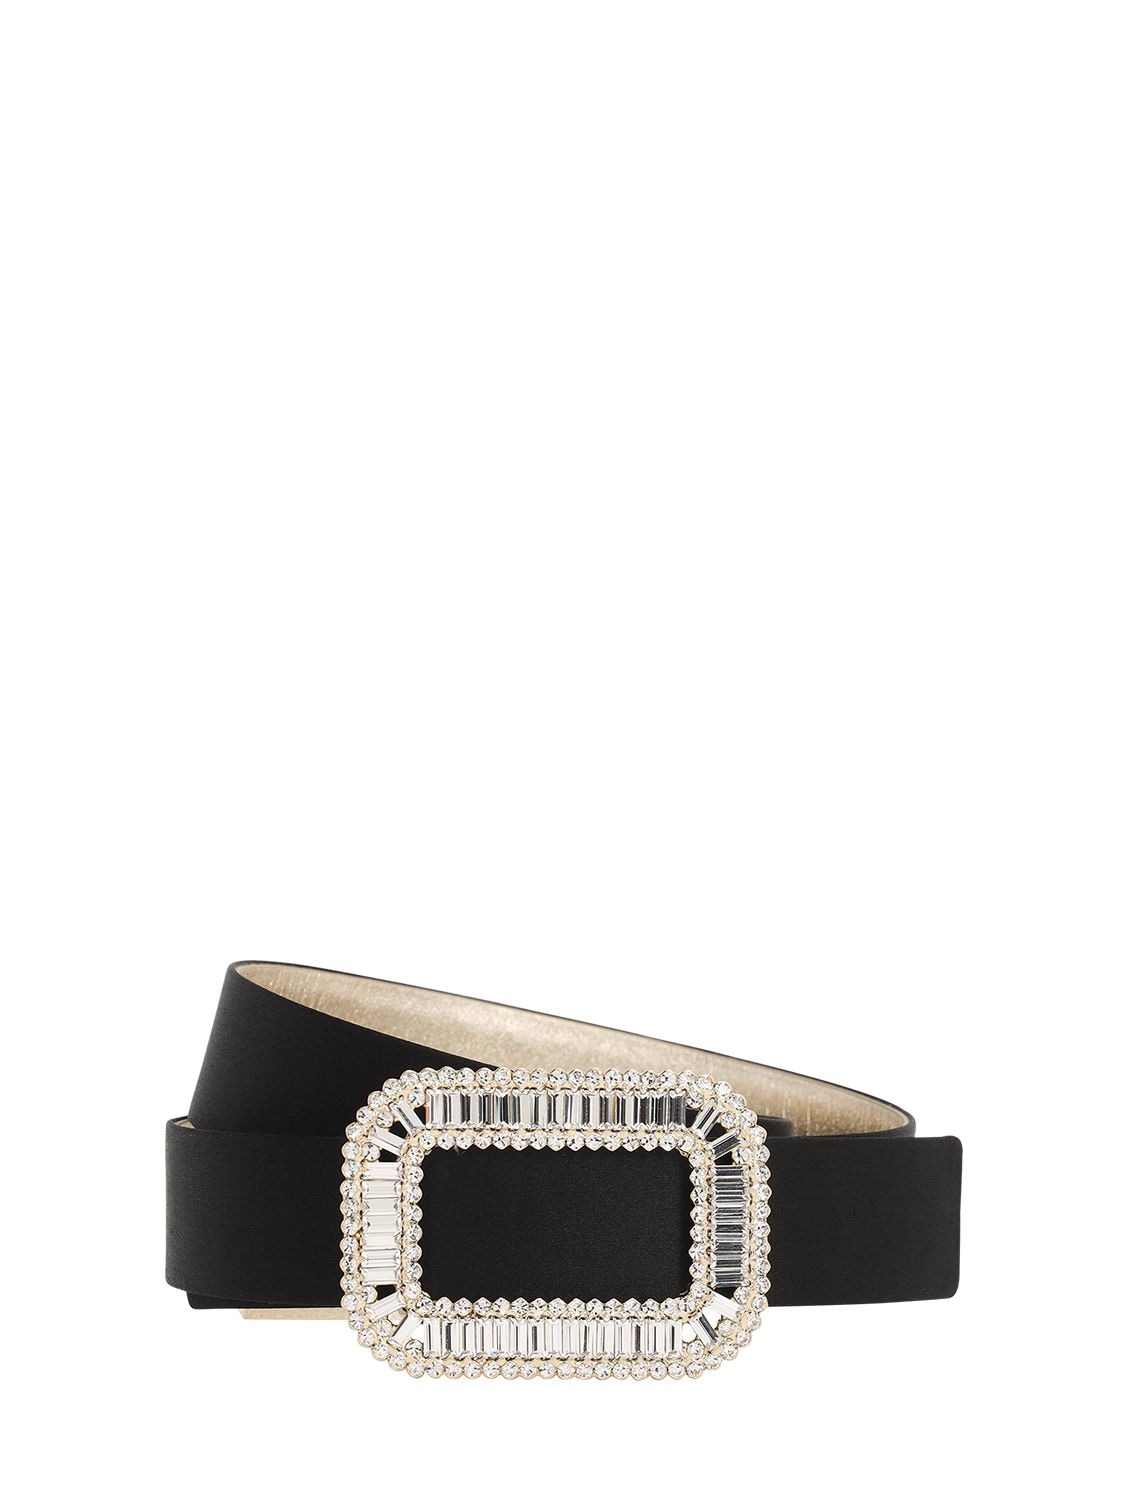 Get the best Roger Vivier's Accessories | Discounted Up To 26%